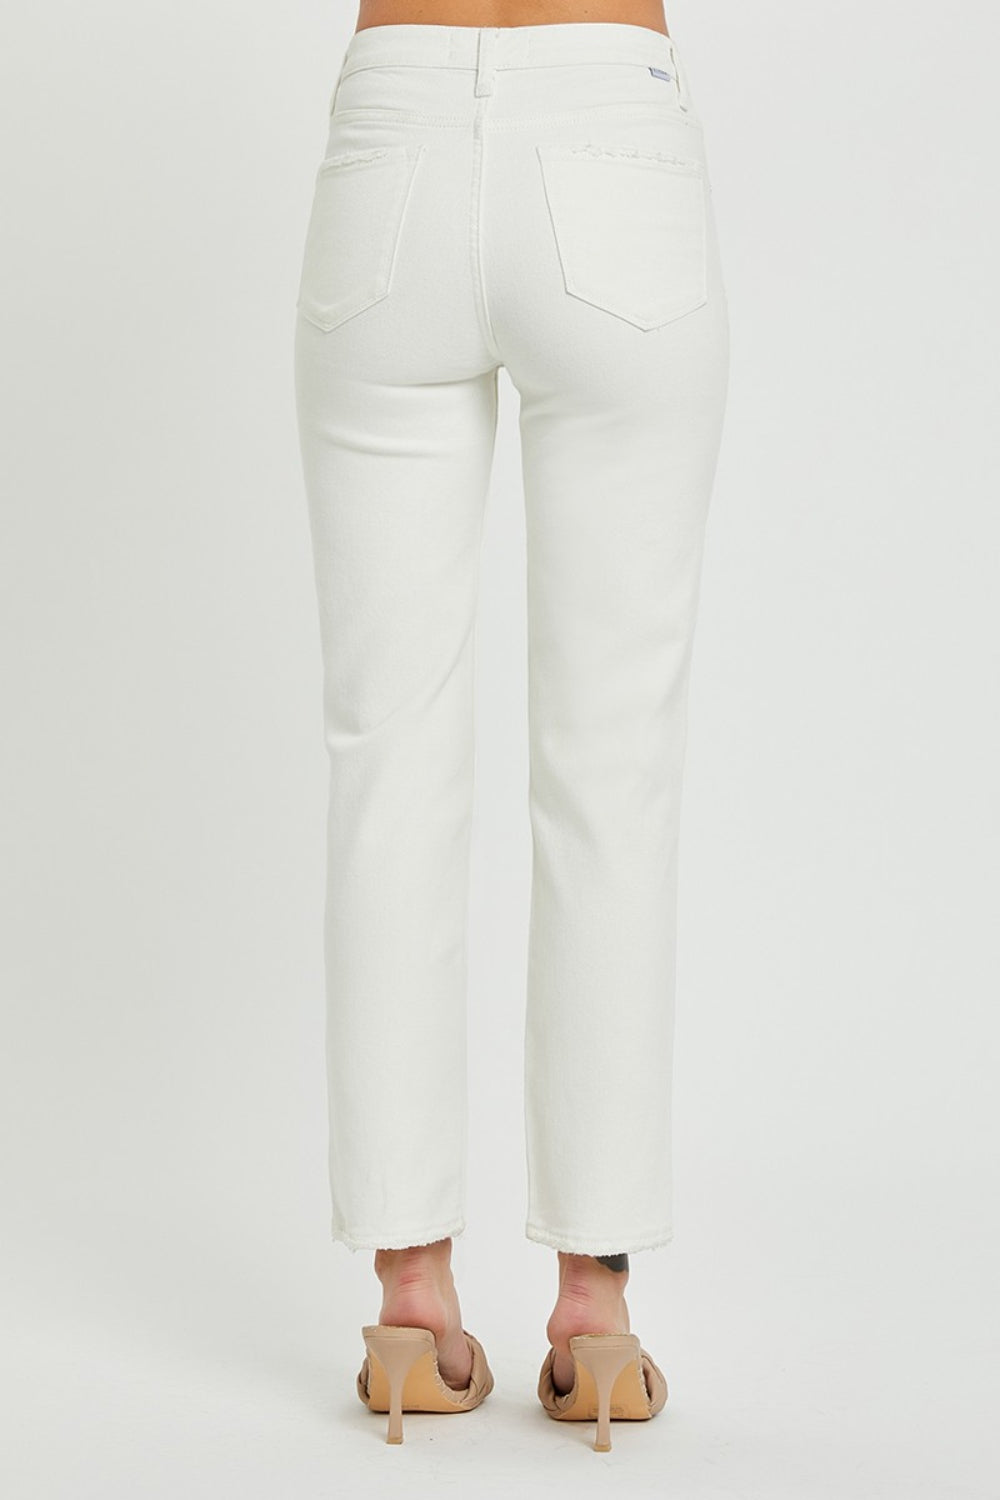 ONLINE ONLY! RISEN Full Size Mid-Rise Tummy Control Straight Jeans